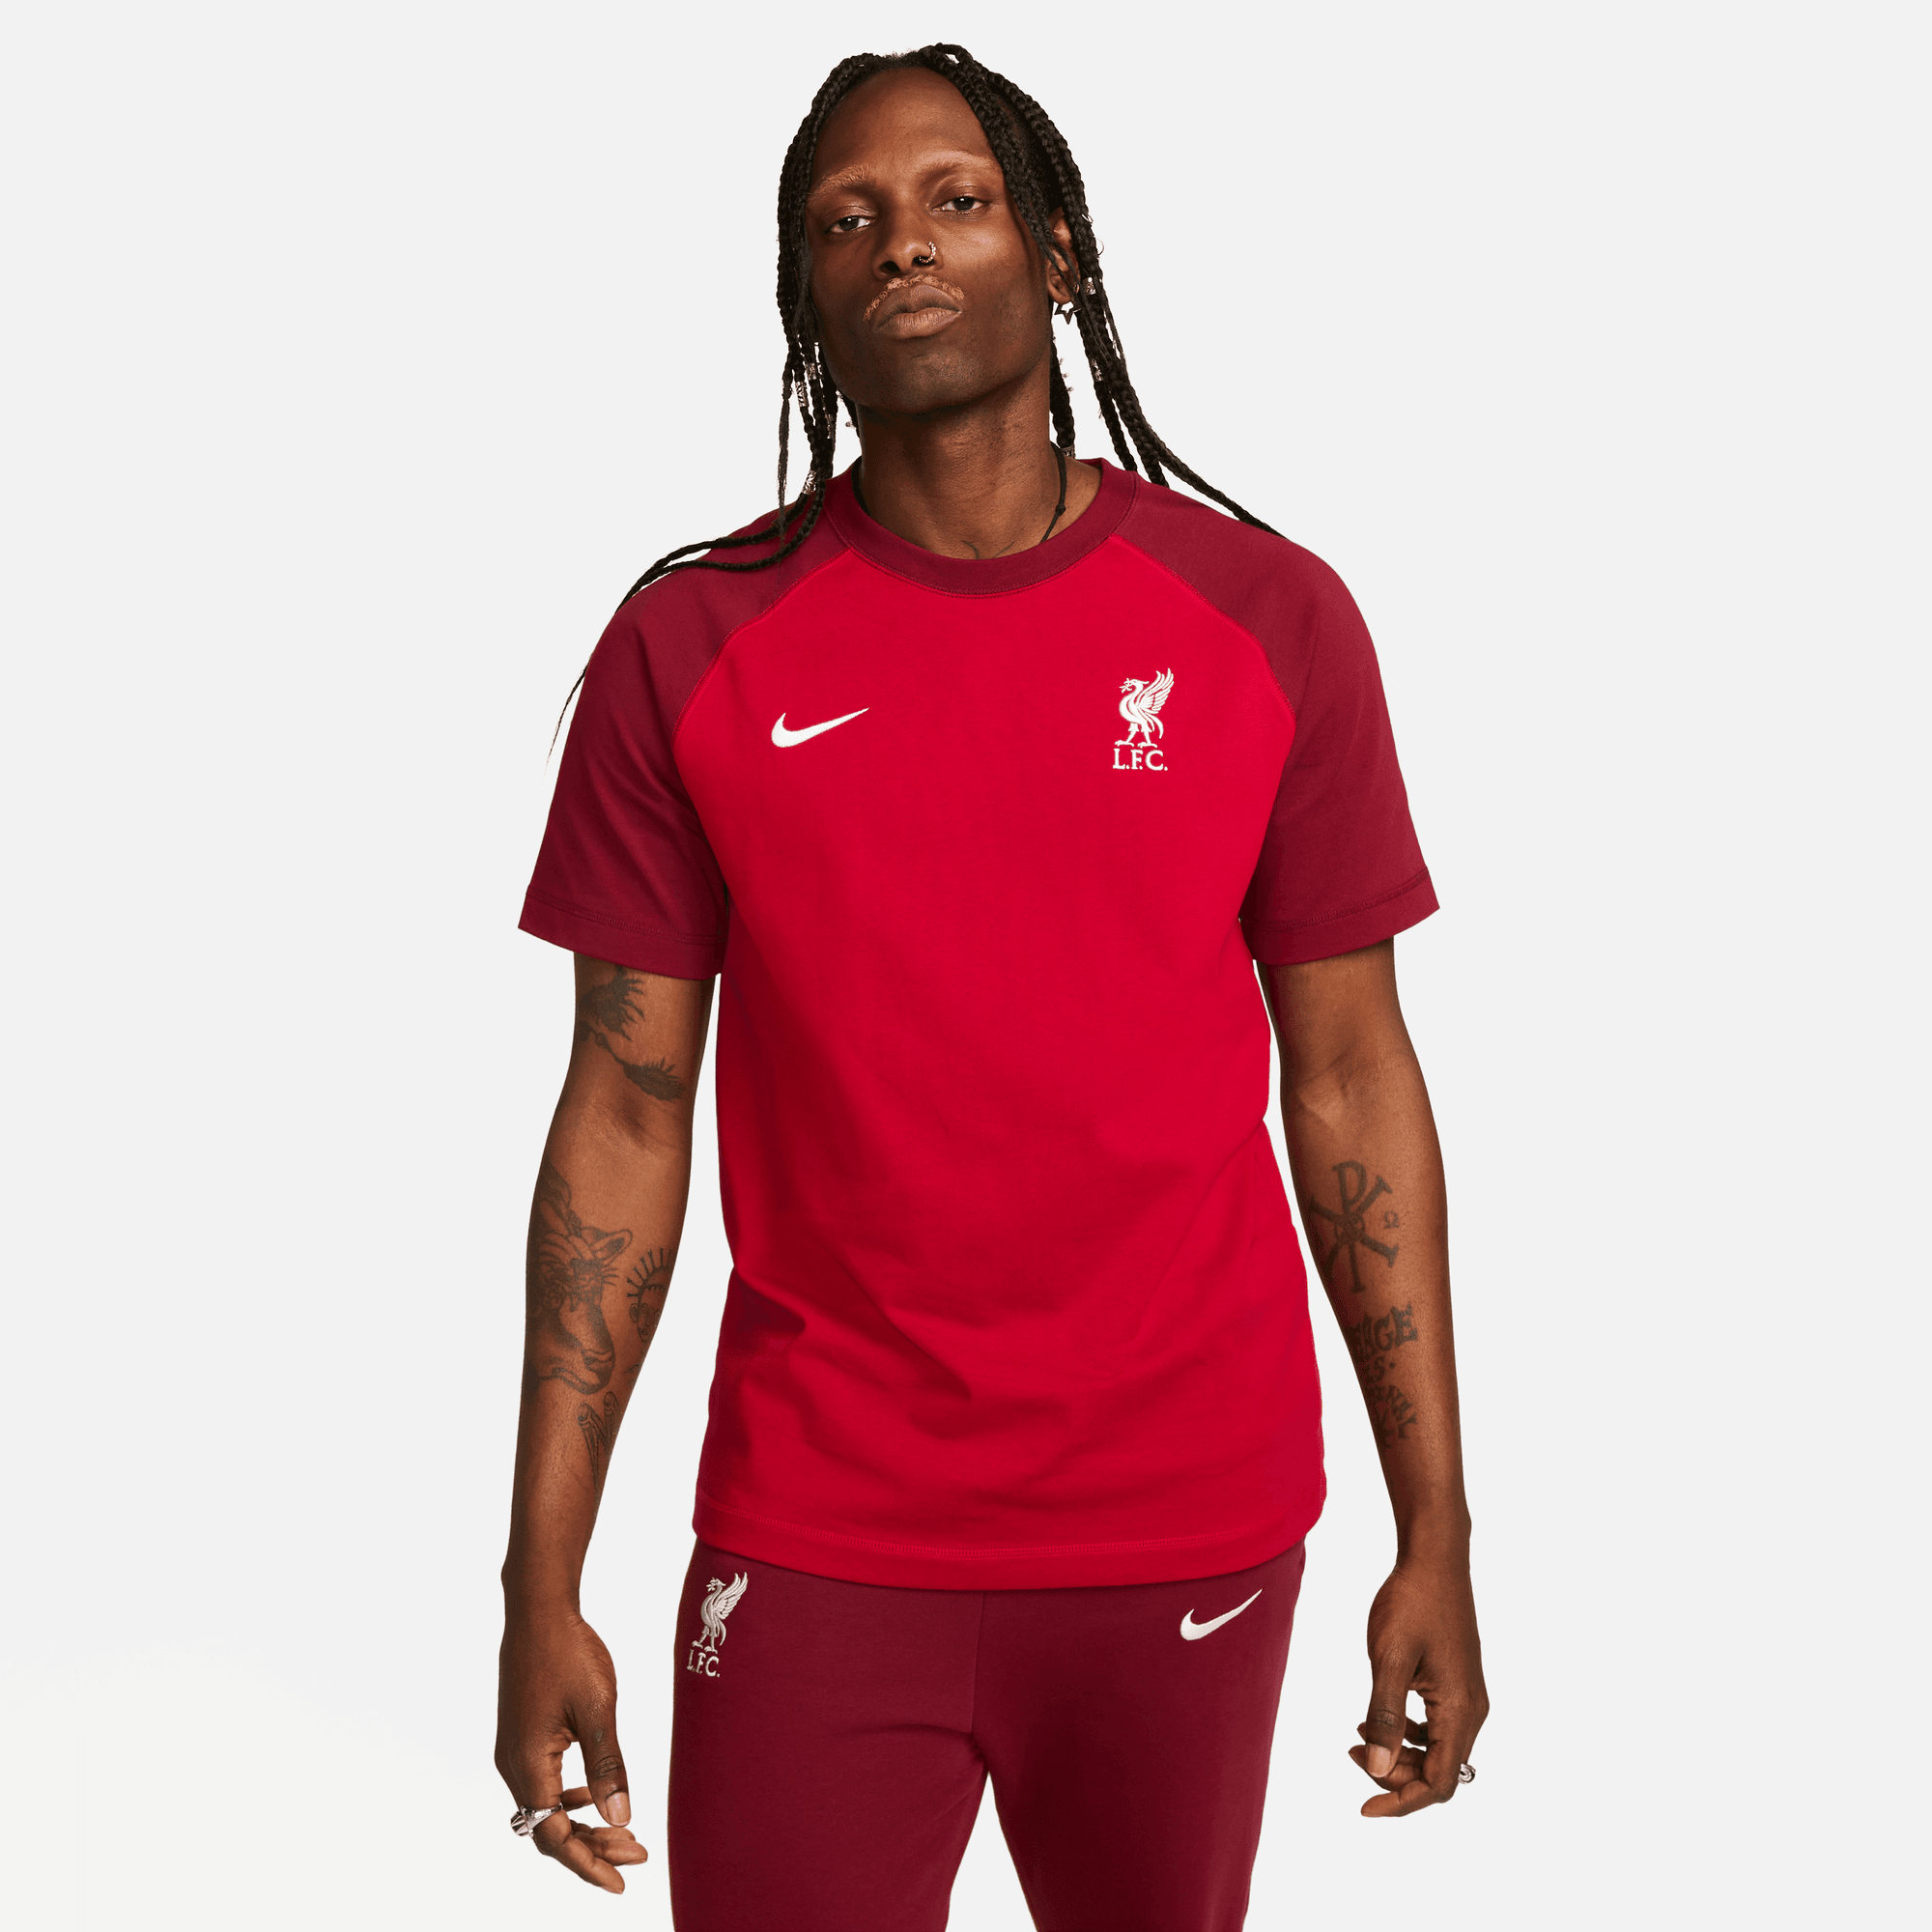 Liverpool Training Kit, Jacket, Tracksuit, Tops and Pants